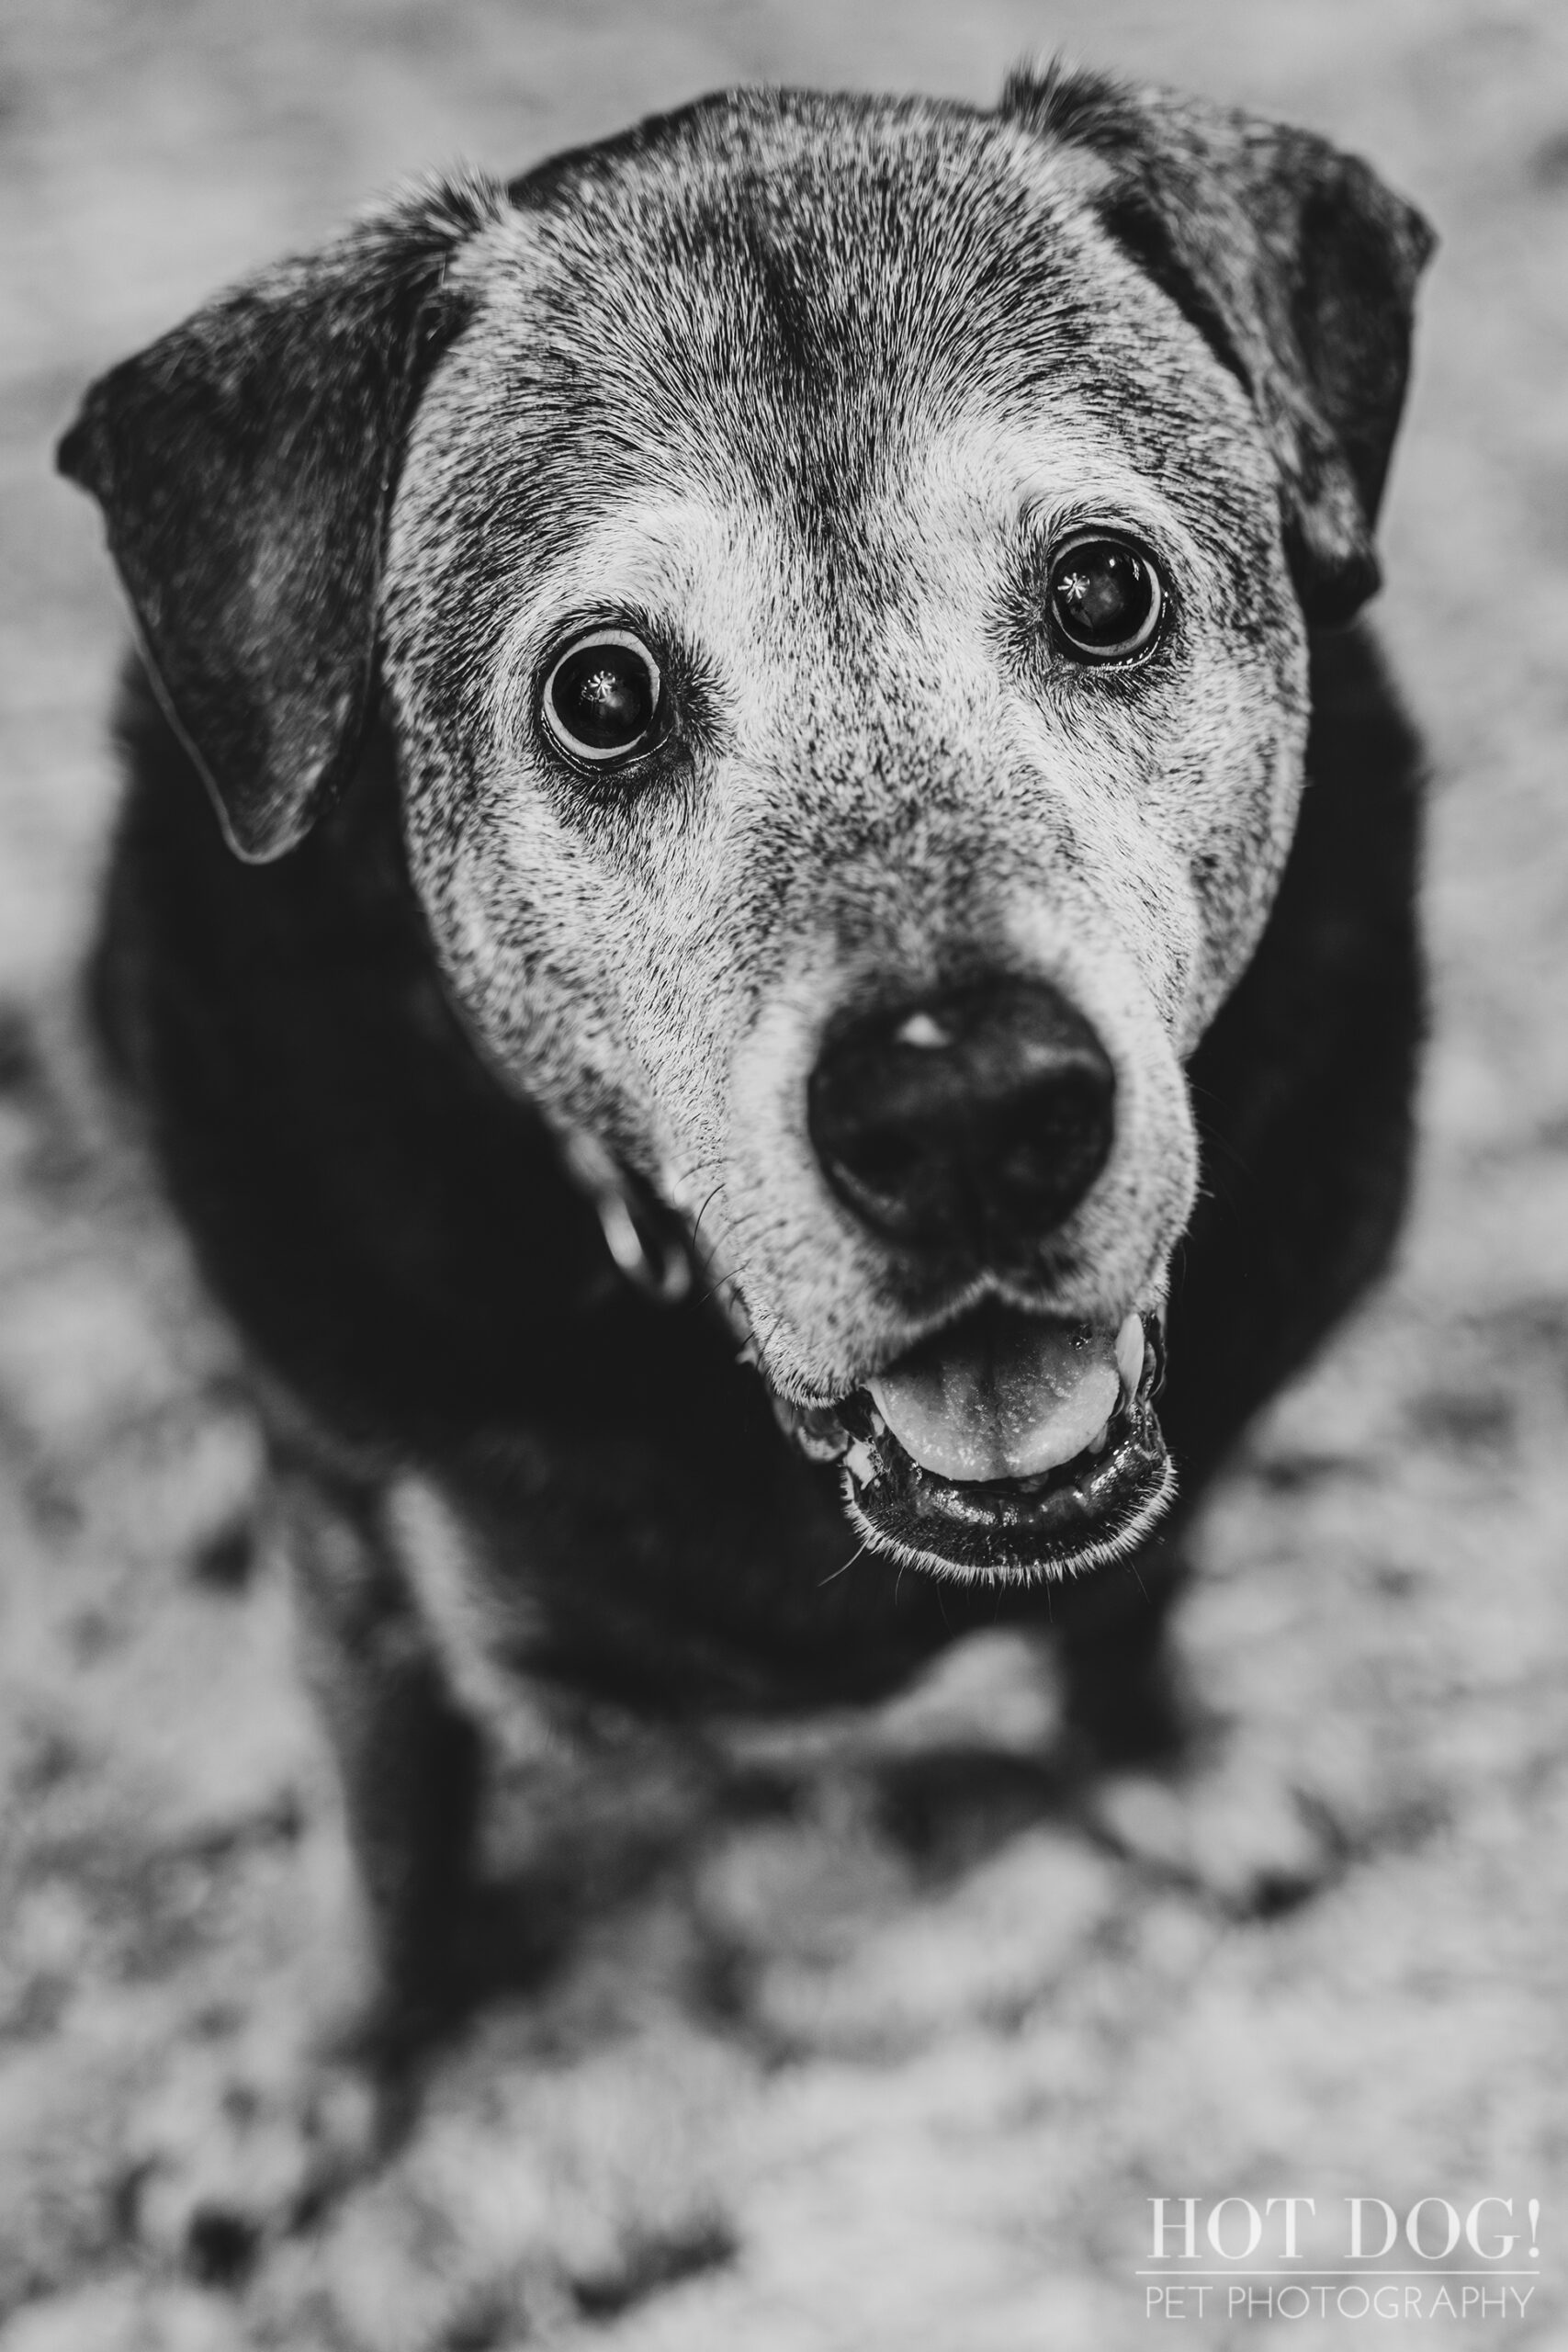 Lambeau the senior lab mastiff mix is the star of this professional pet photo session by Hot Dog! Pet Photography.
